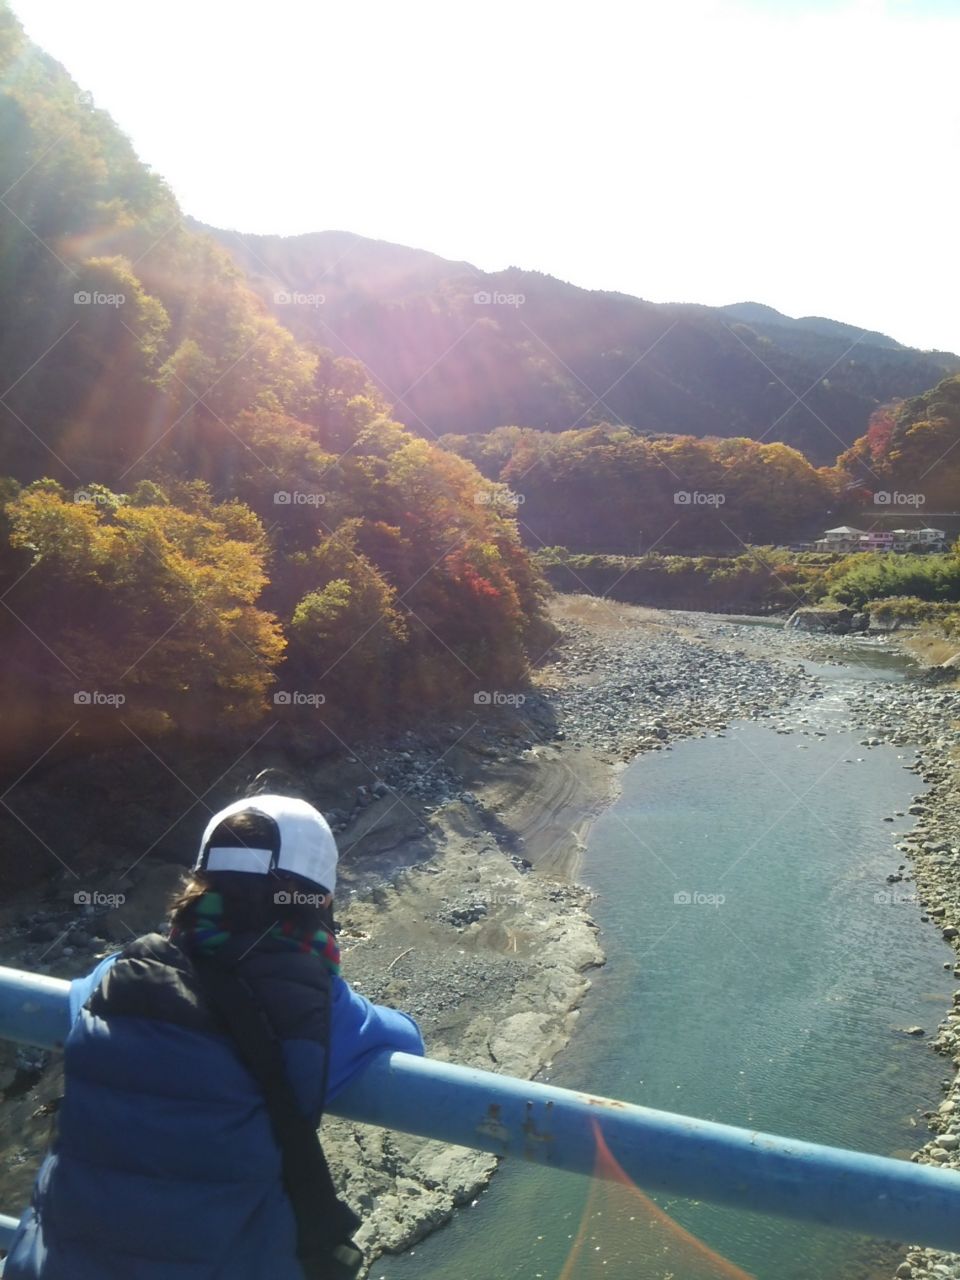 lriver on the fall